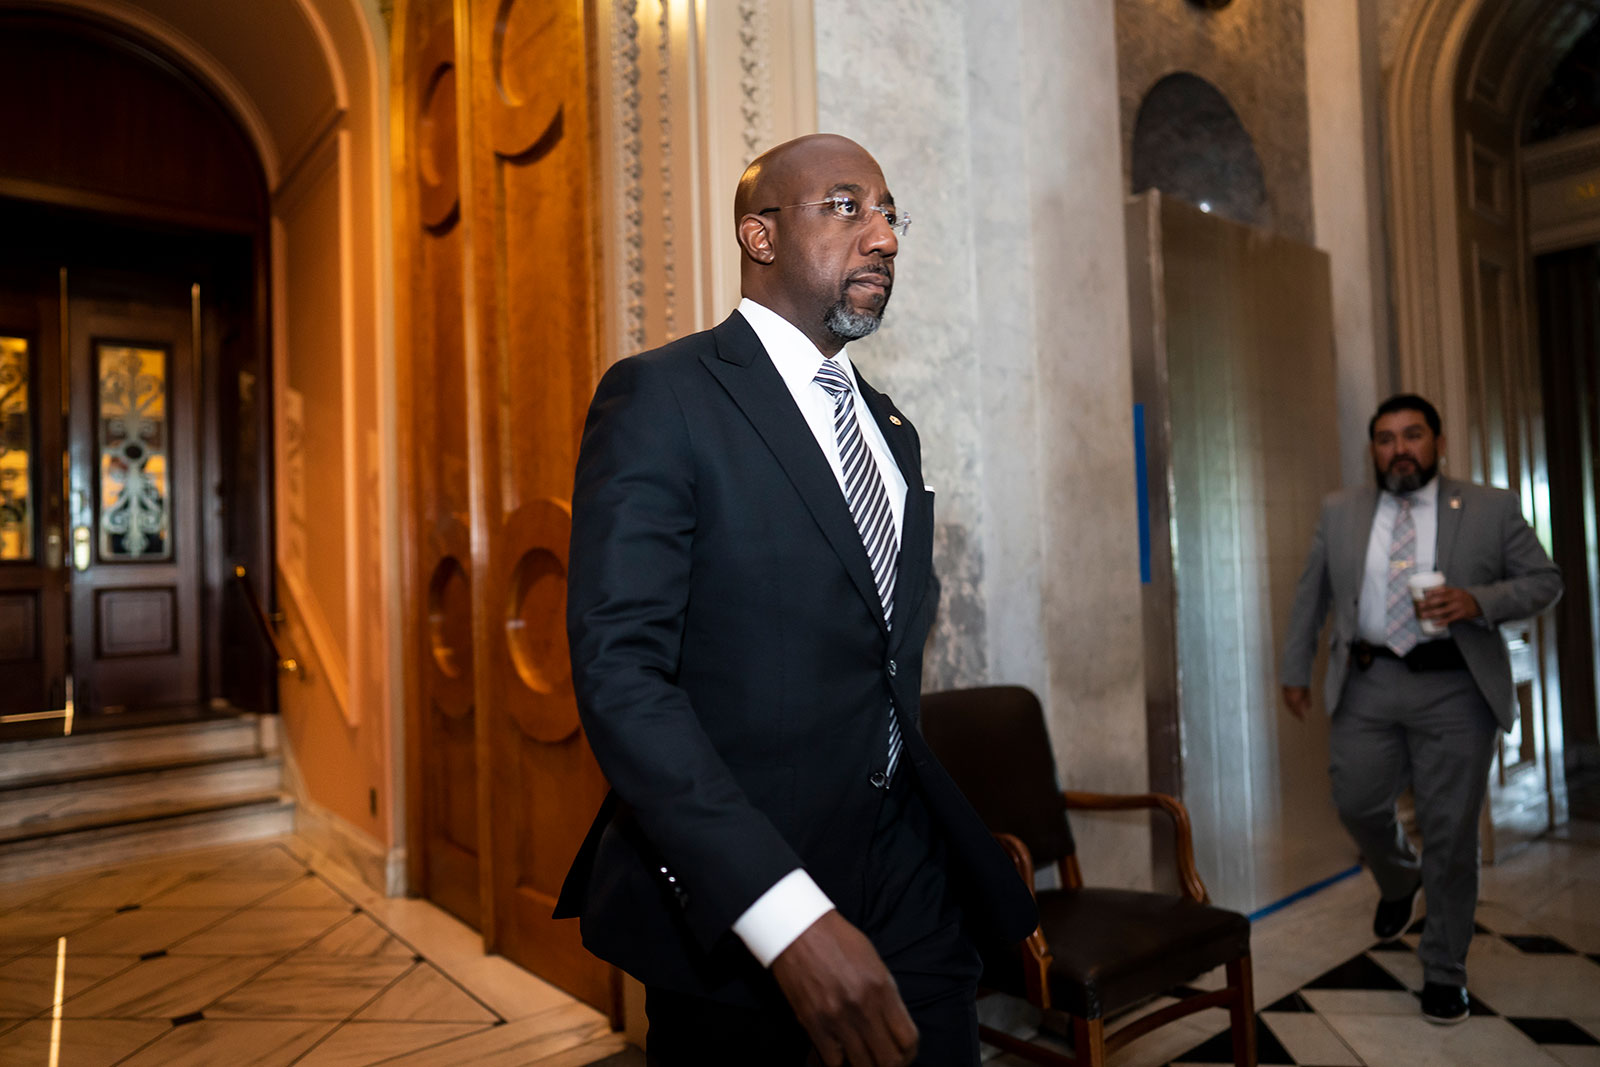 Sen. Raphael Warnock leaves the chamber before a procedural vote at the Capitol in Washington on May 11.